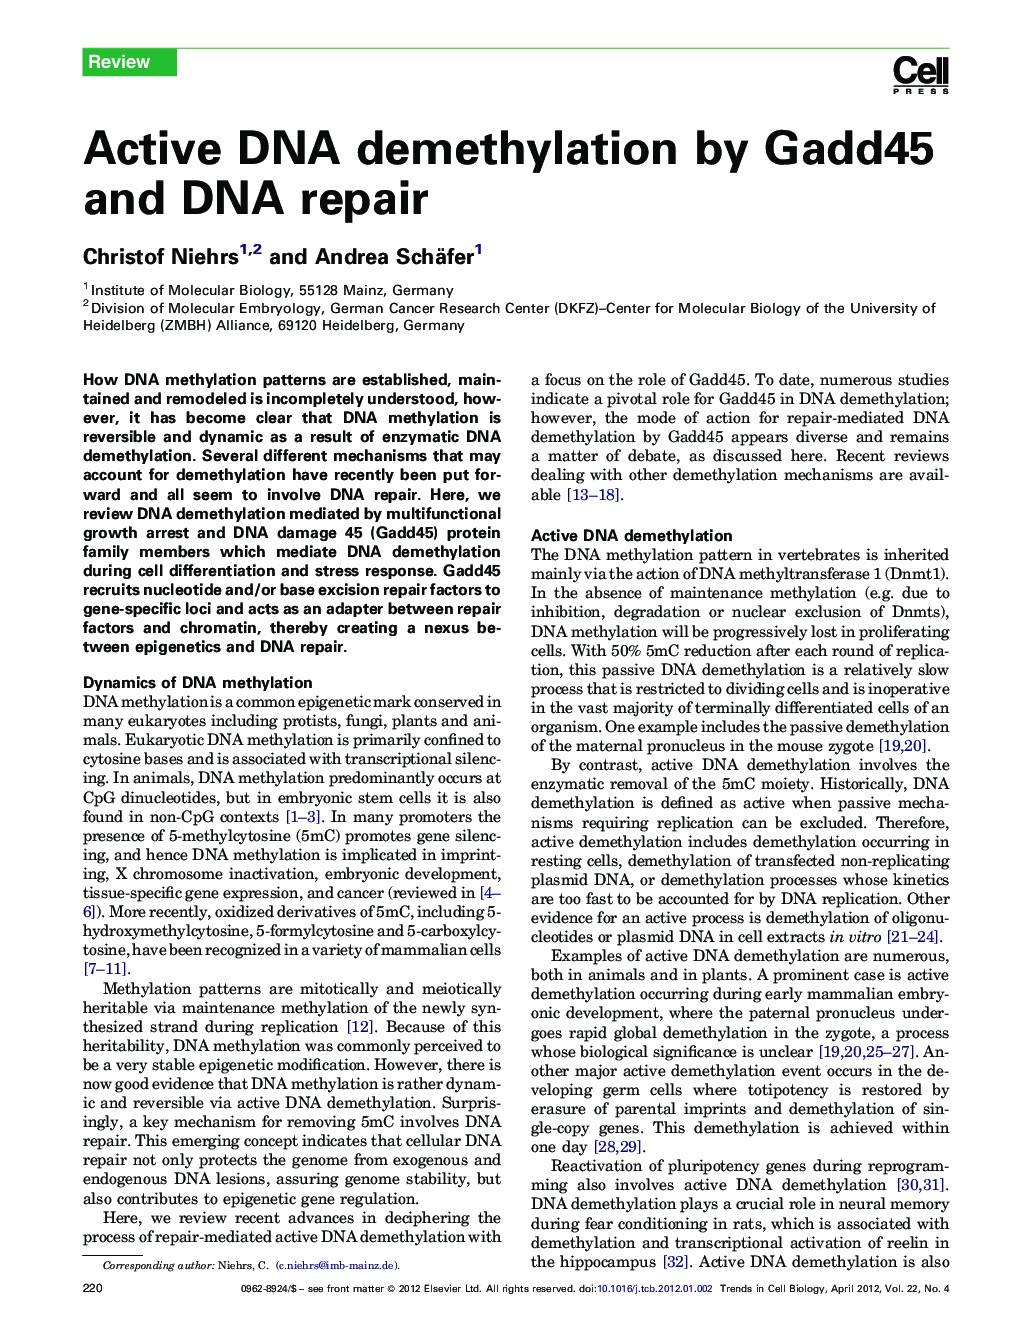 Active DNA demethylation by Gadd45 and DNA repair